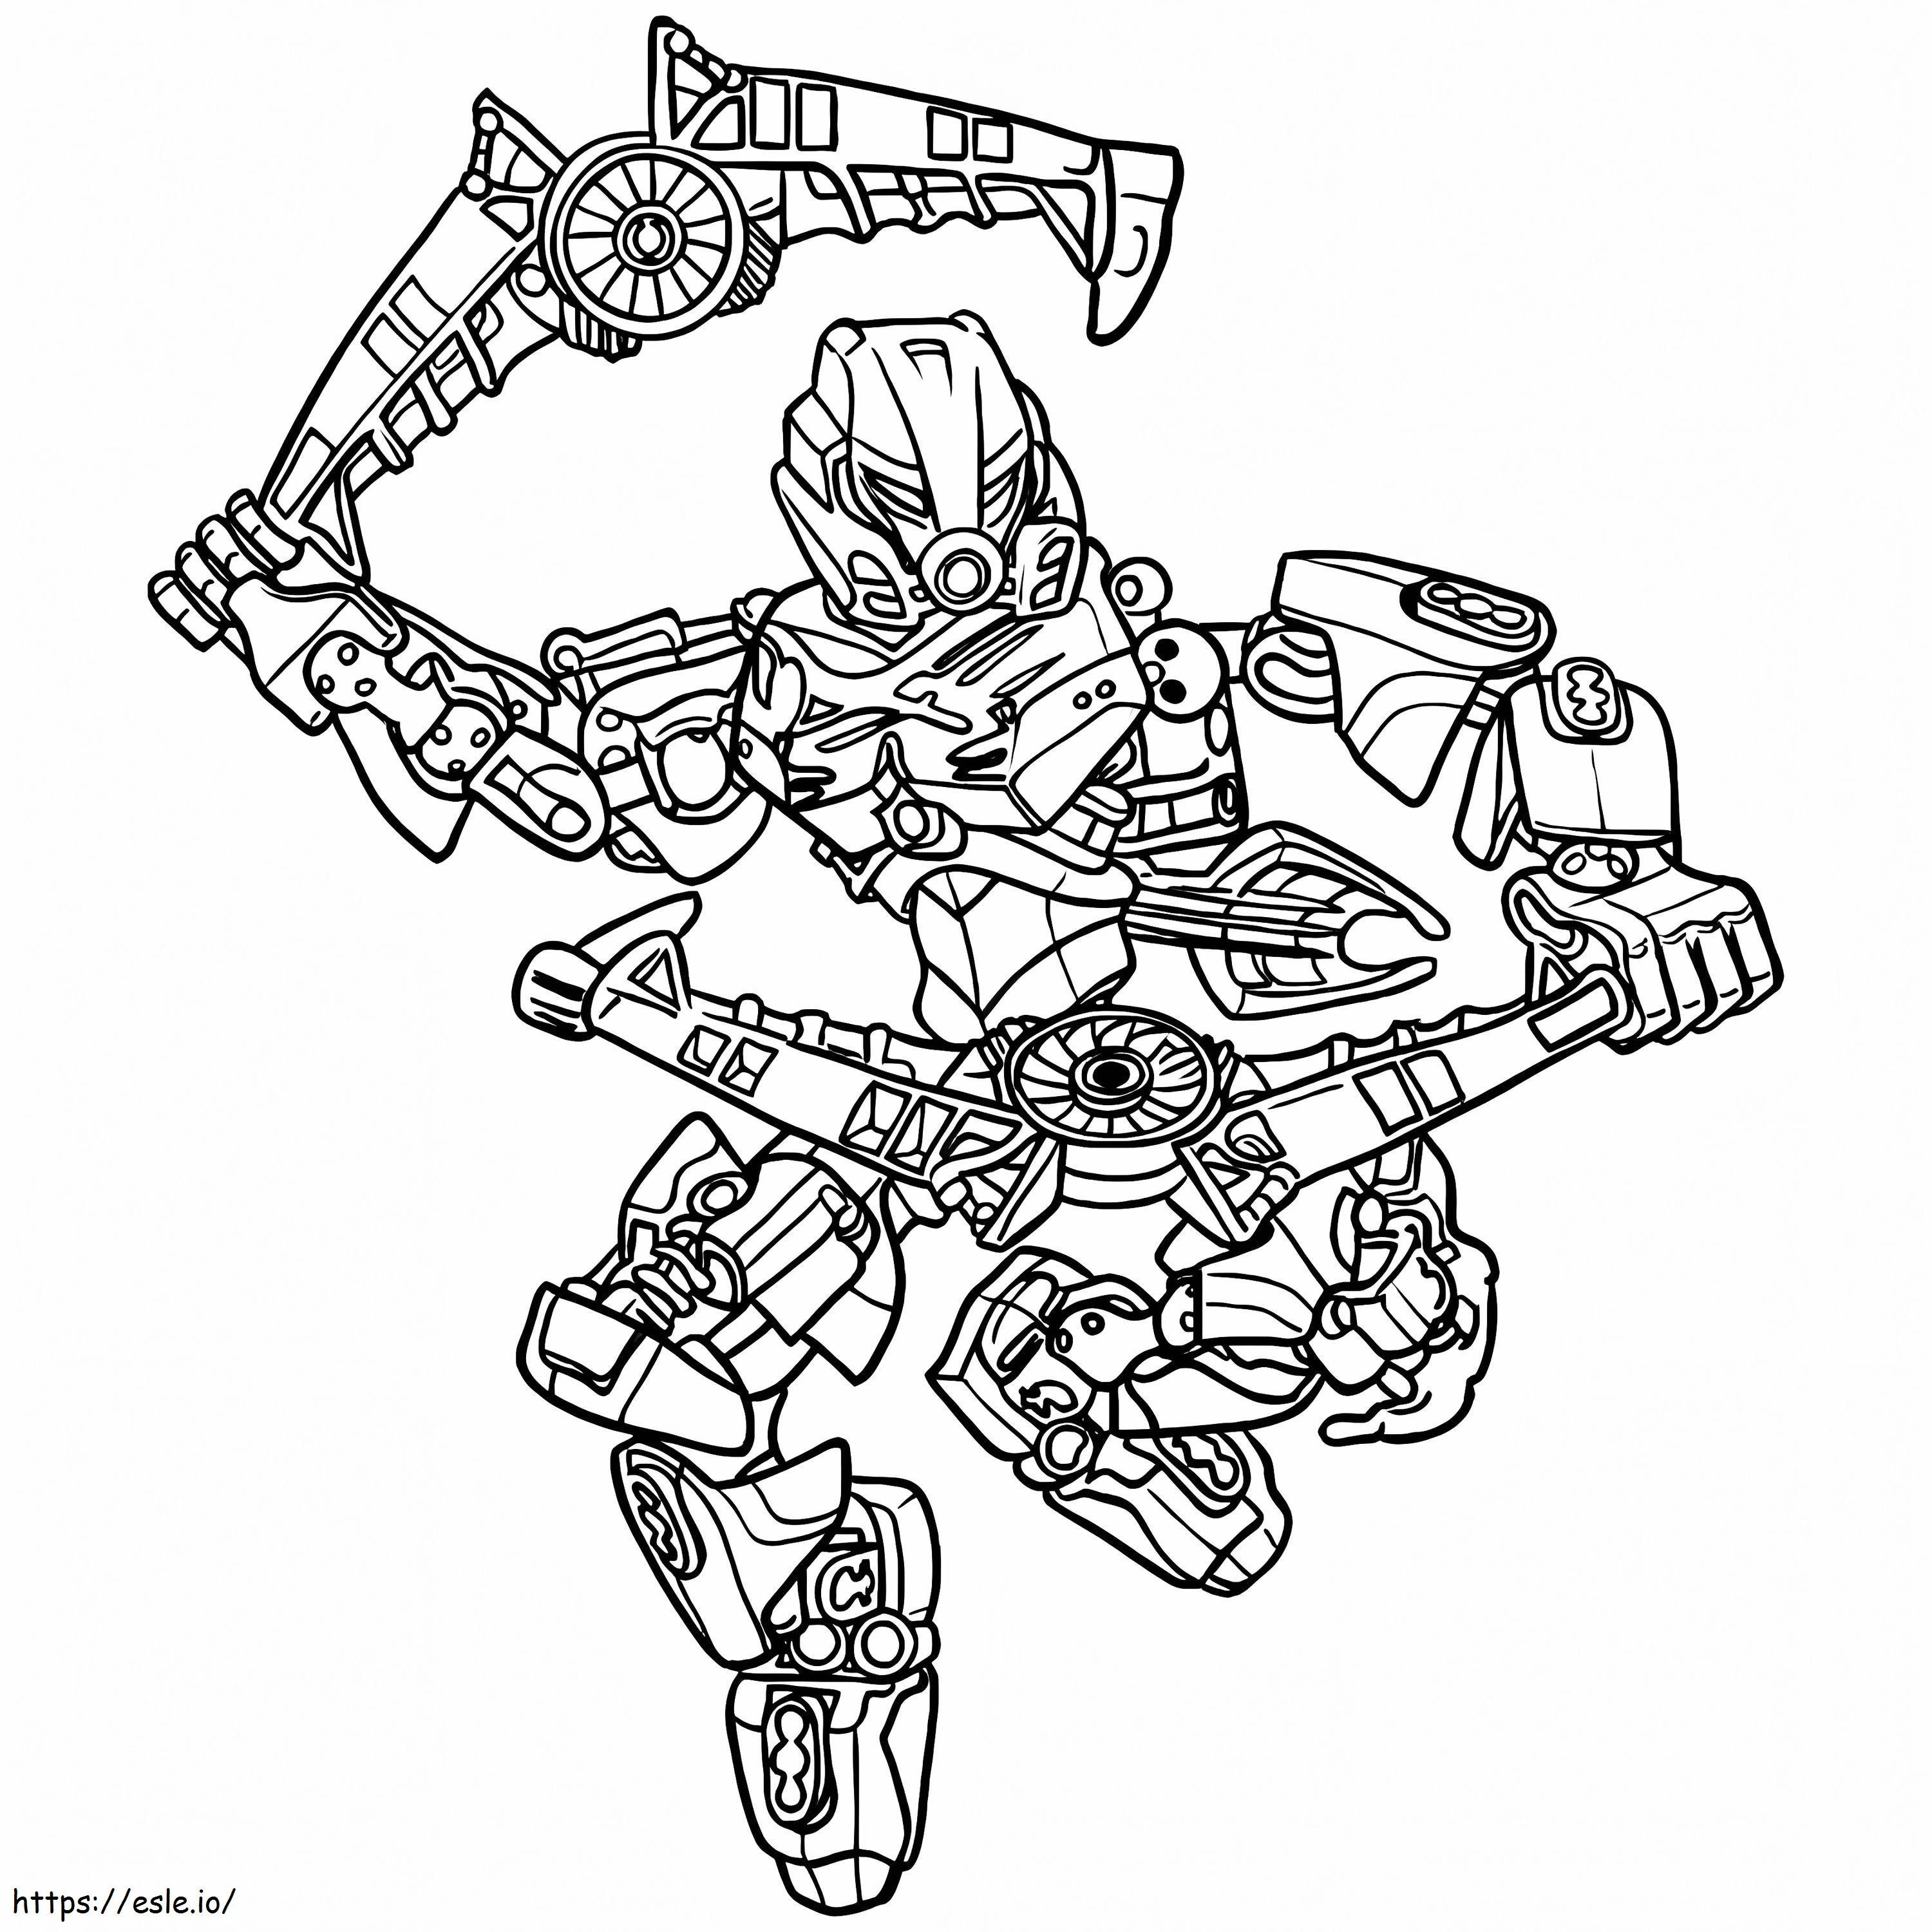 Bionicle Stone coloring page